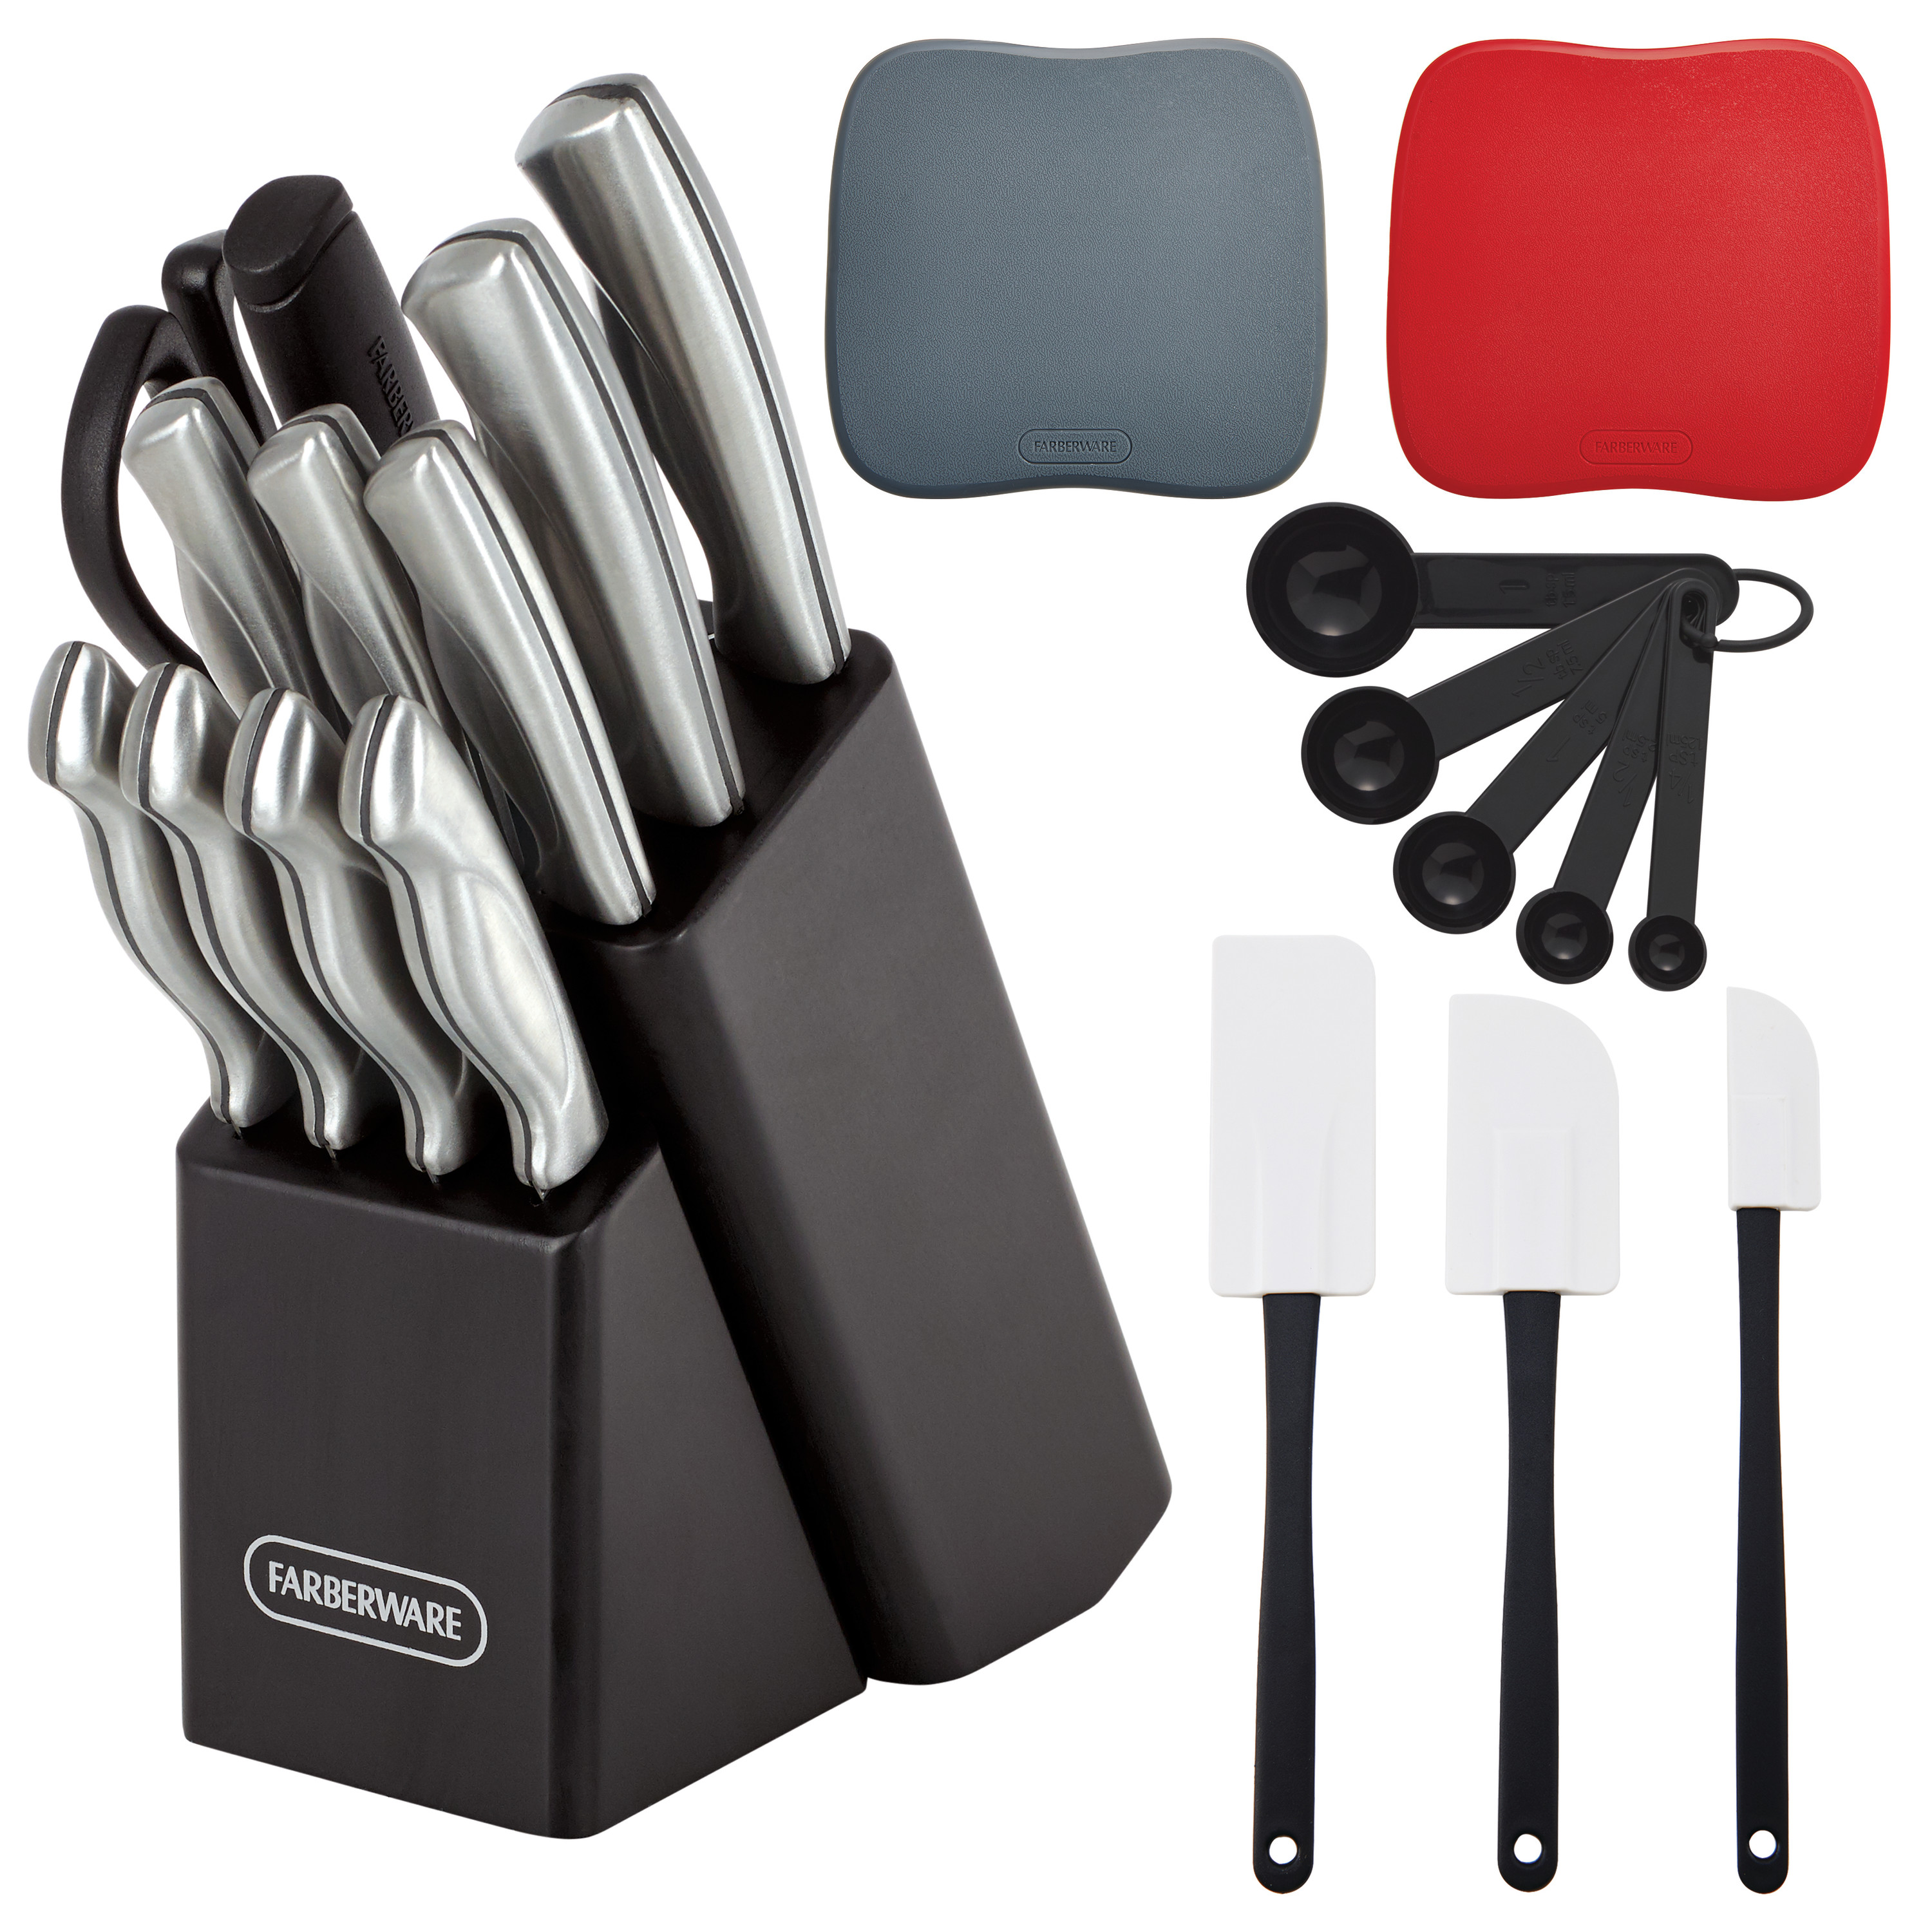 Farberware Classic 22 Piece Stamped Stainless Steel Knife Set and Utensil Set - image 1 of 27